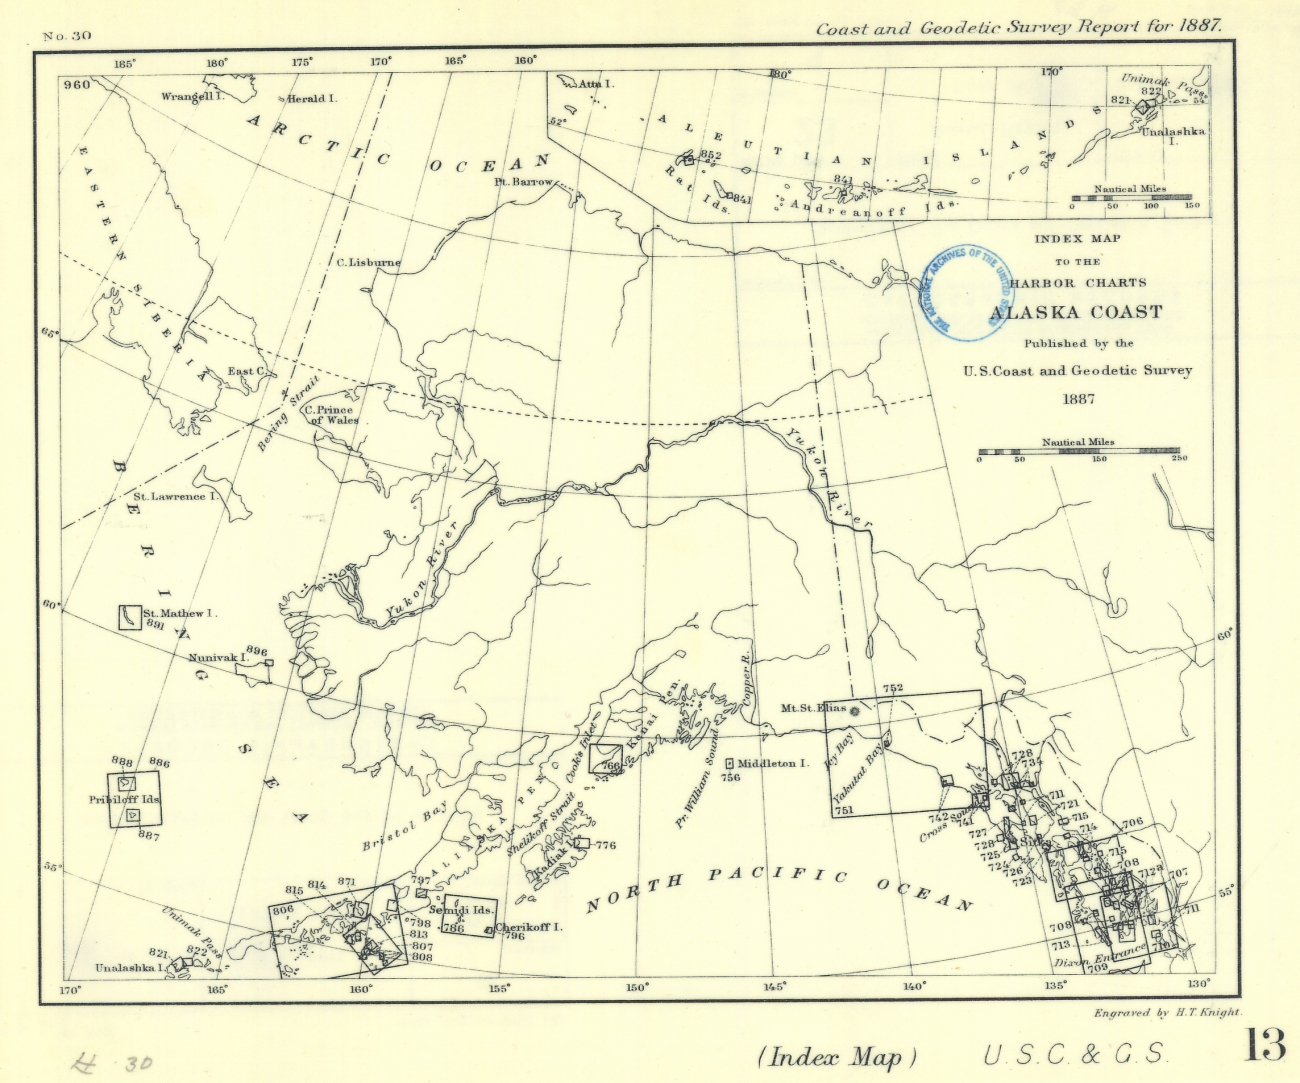 Index Map to the Harbor Charts Alaska CoastPublished by the U